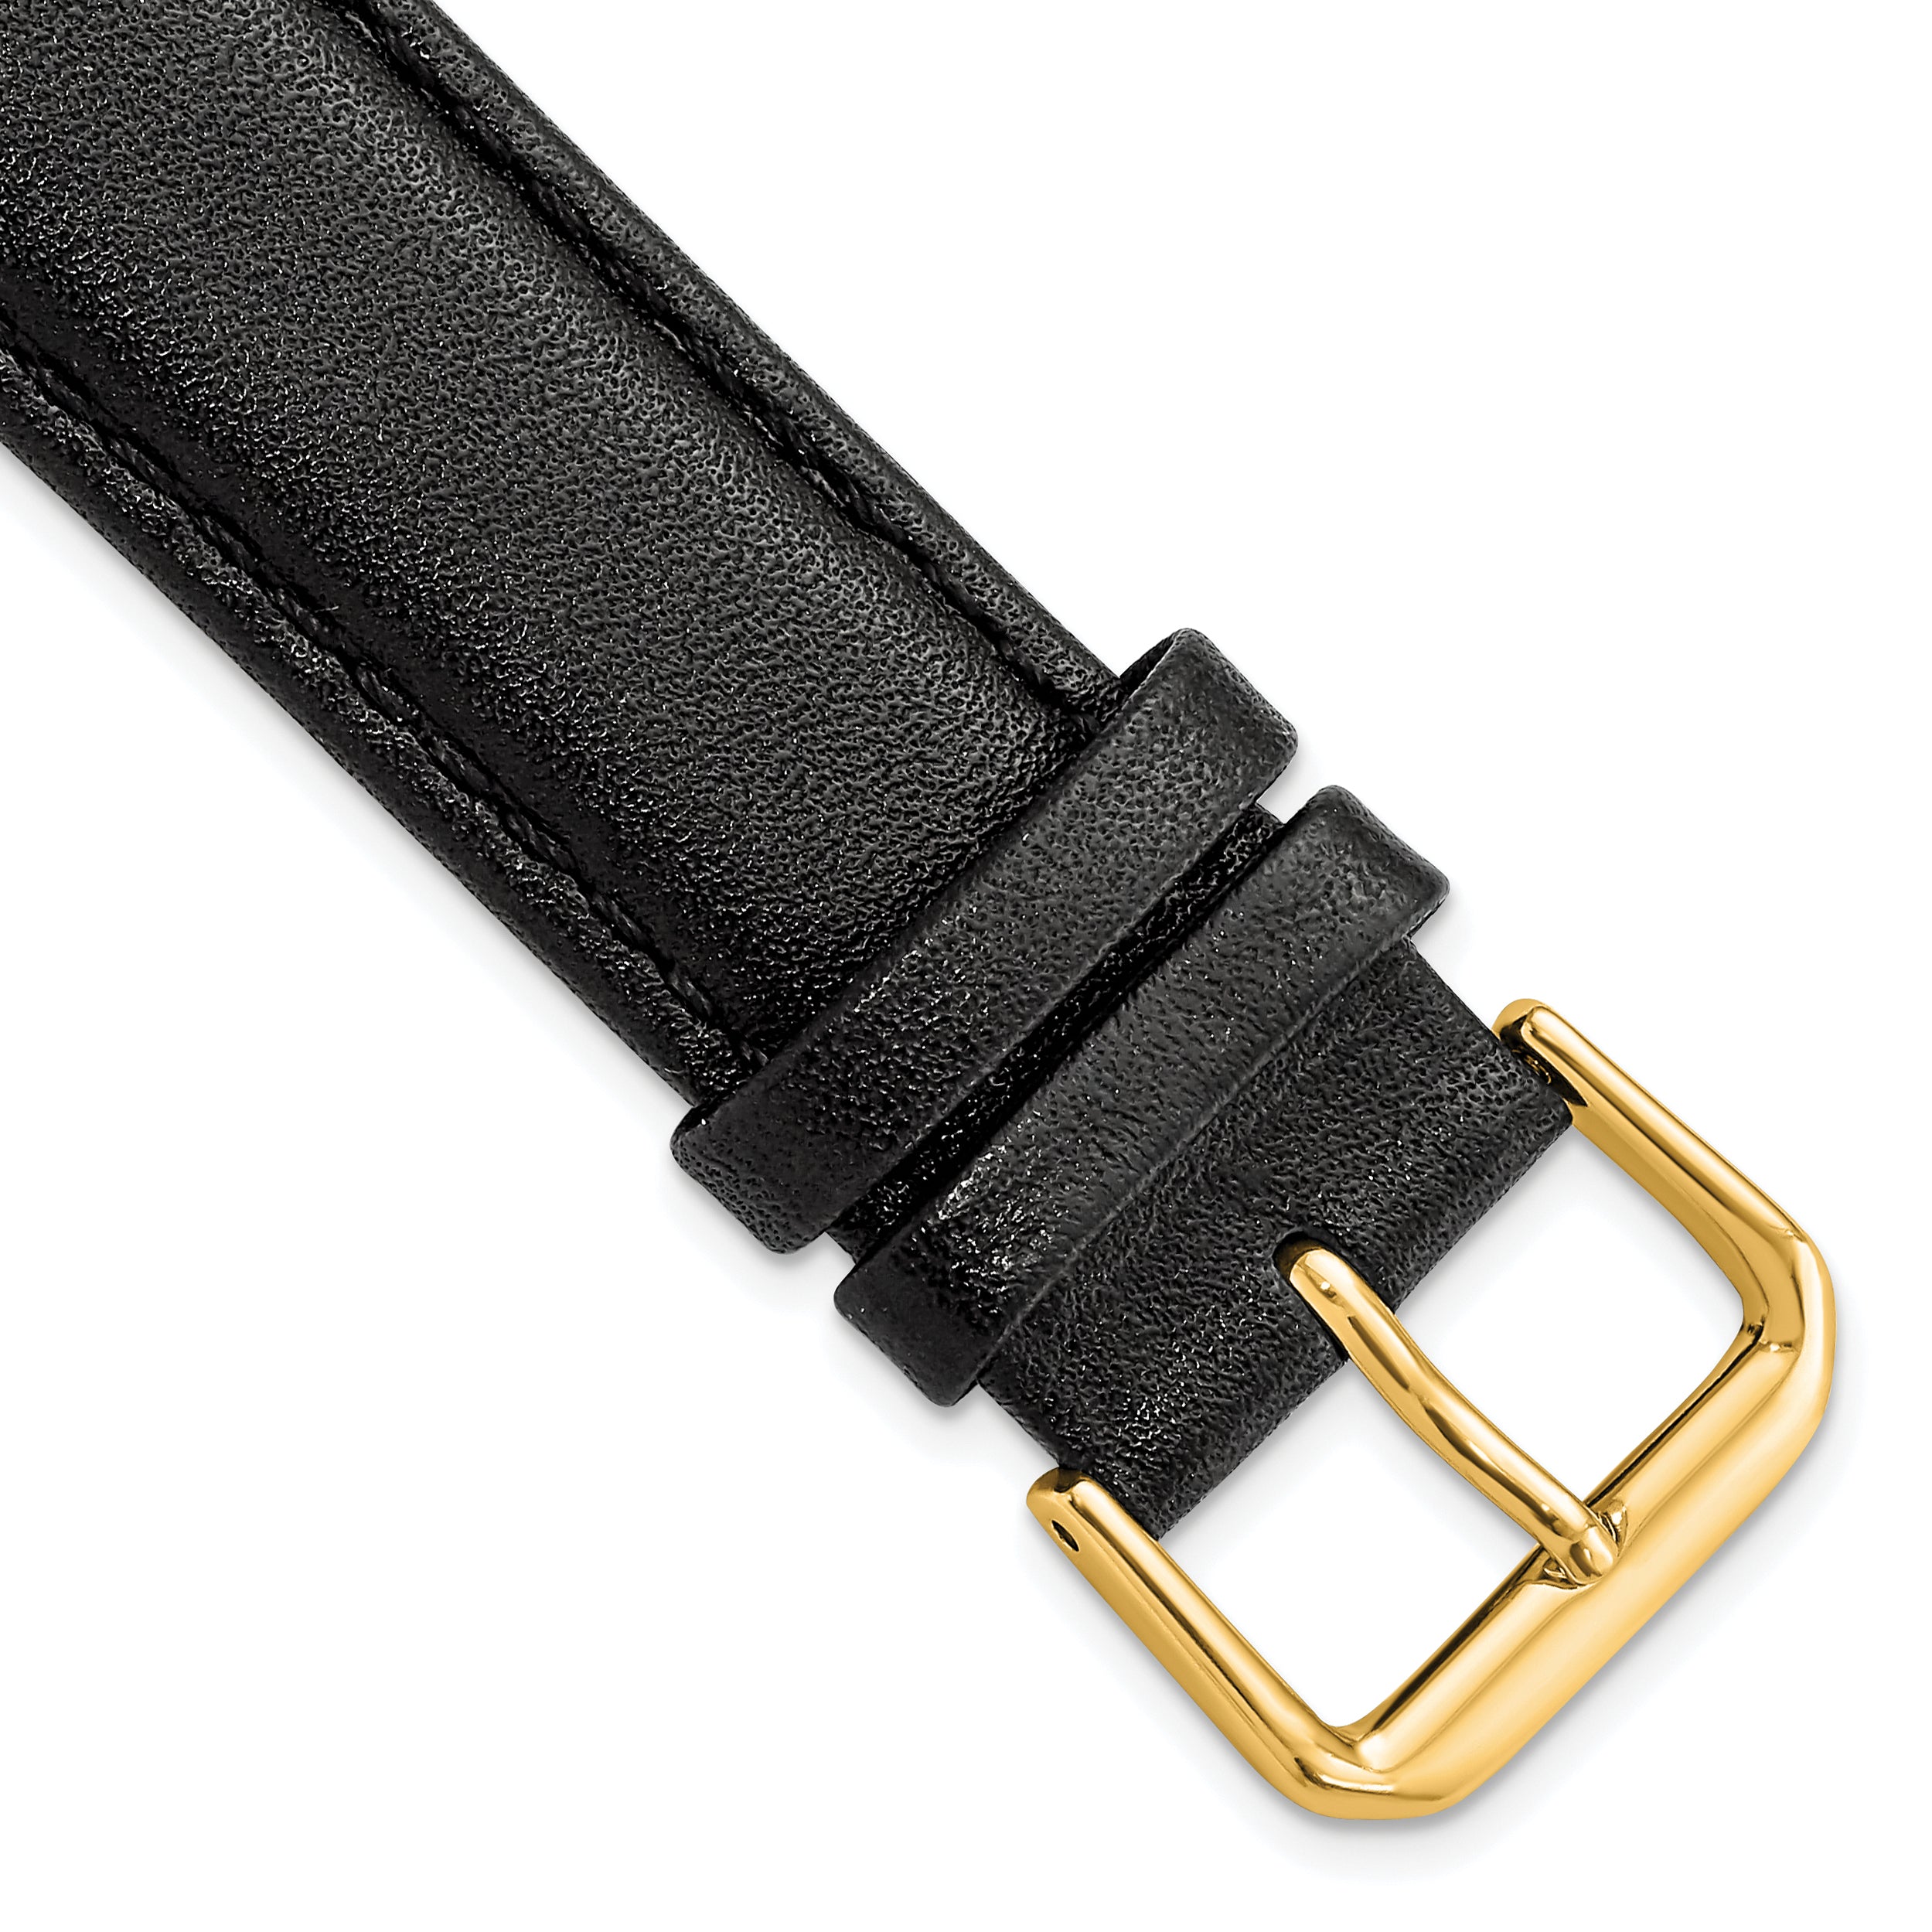 DeBeer 20mm Black Long Smooth Leather with Gold-tone Buckle 8.5 inch Watch Band